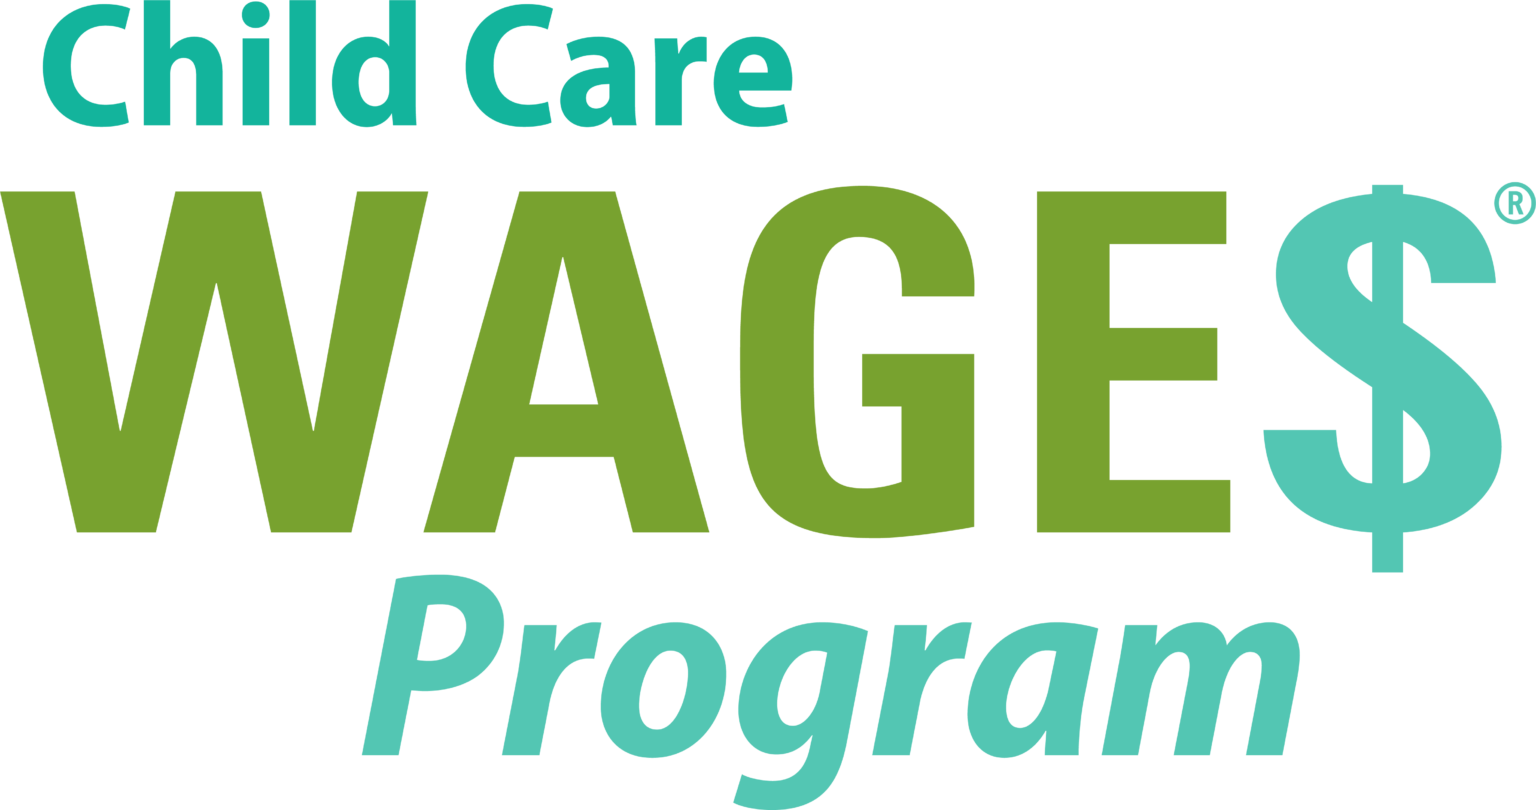 Child Care WAGE® Child Care Services Association